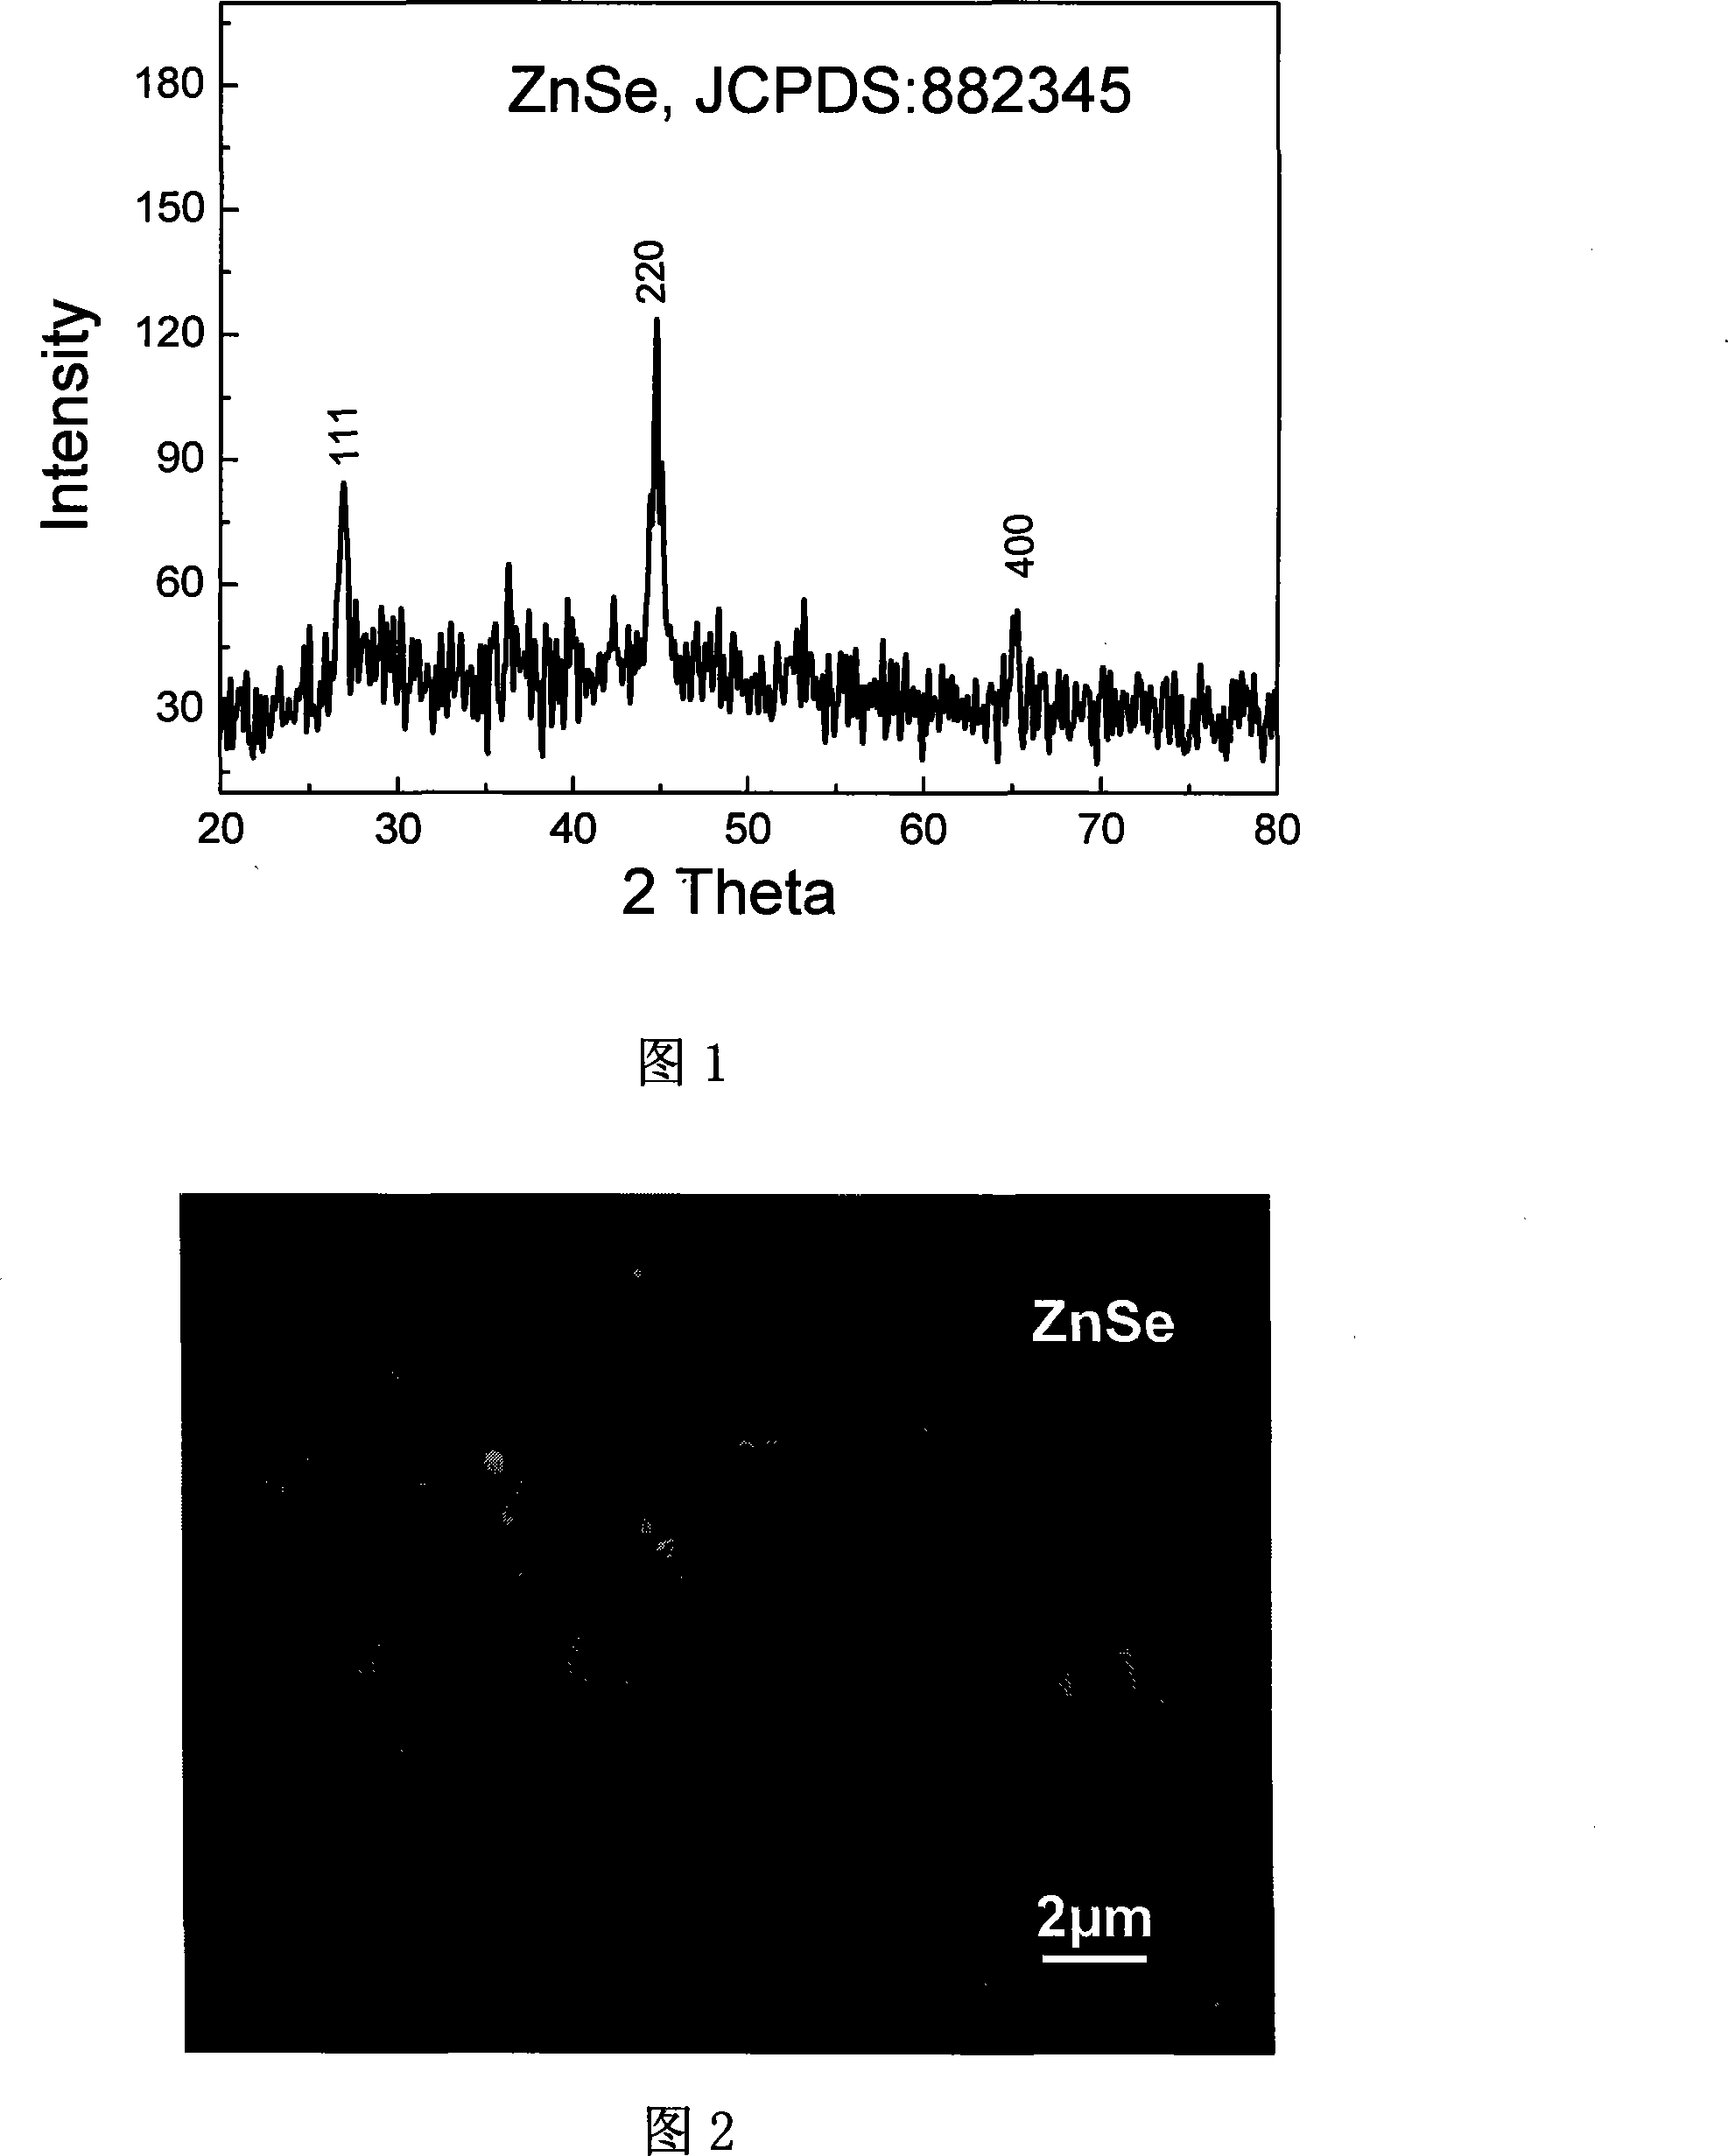 Method for producing selenide and telluride nano-material with composite base metal hydroxide solvent